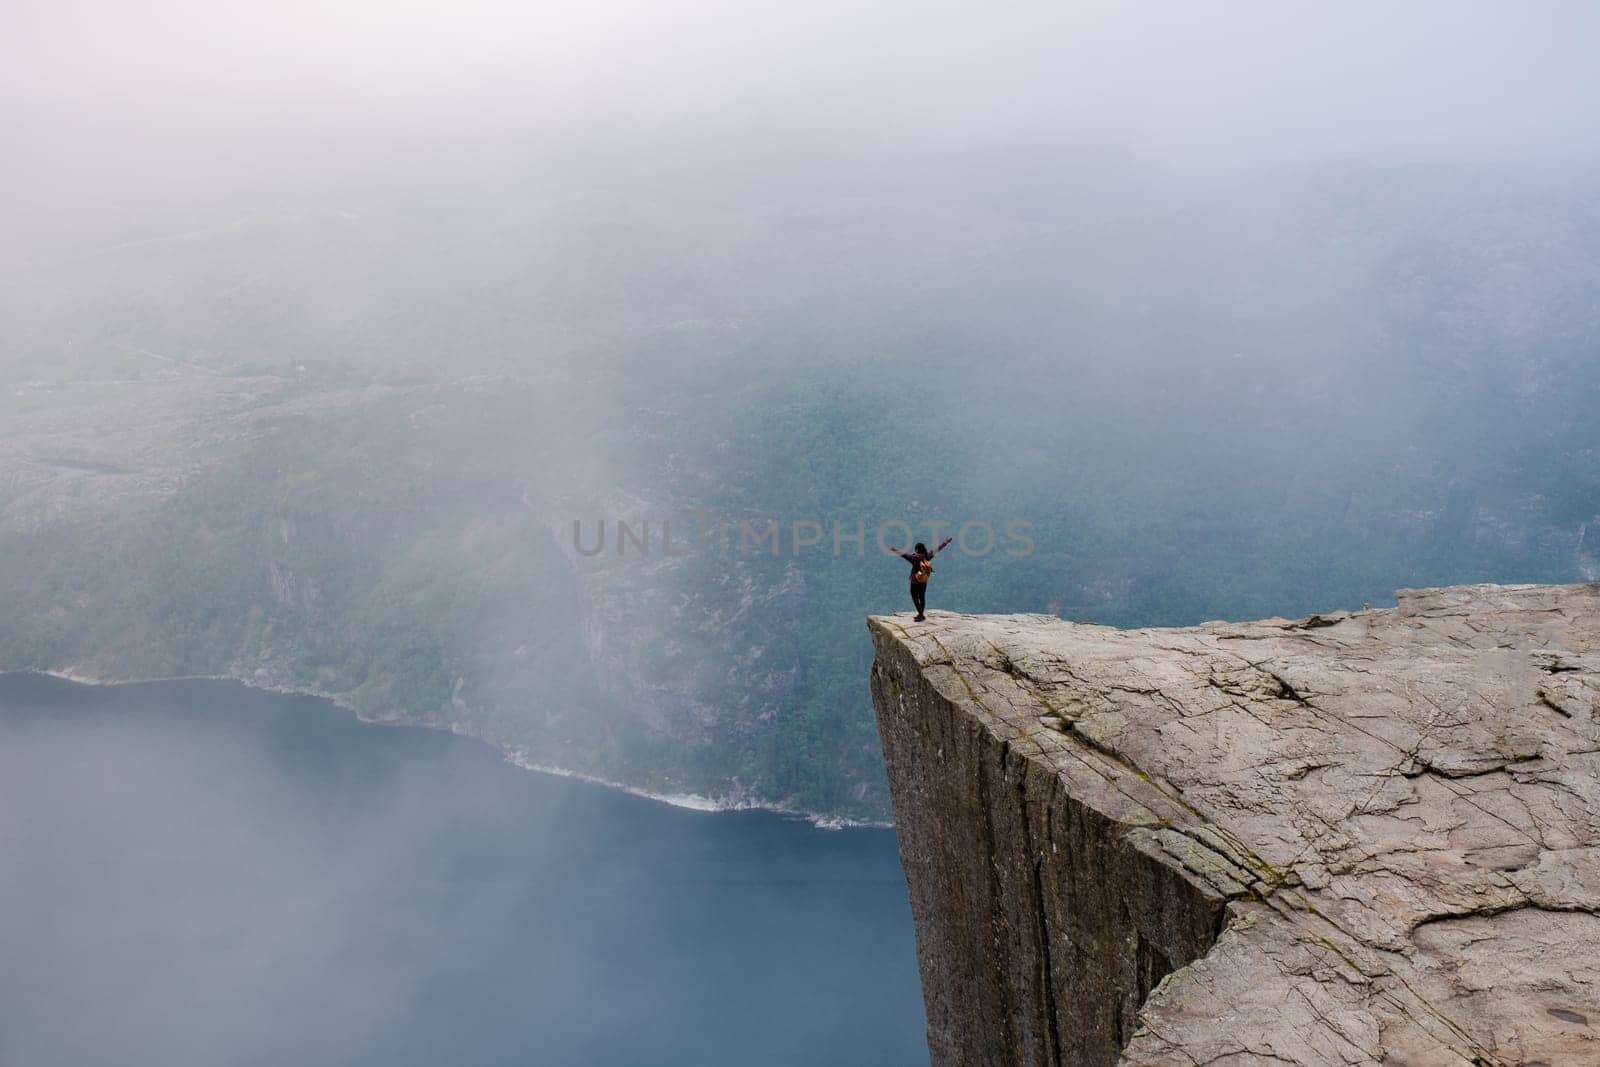 A hiker stands on the edge of a cliff with arms outstretched, taking in the breathtaking view of the Norwegian fjords shrouded in mist. Preikestolen, Norway